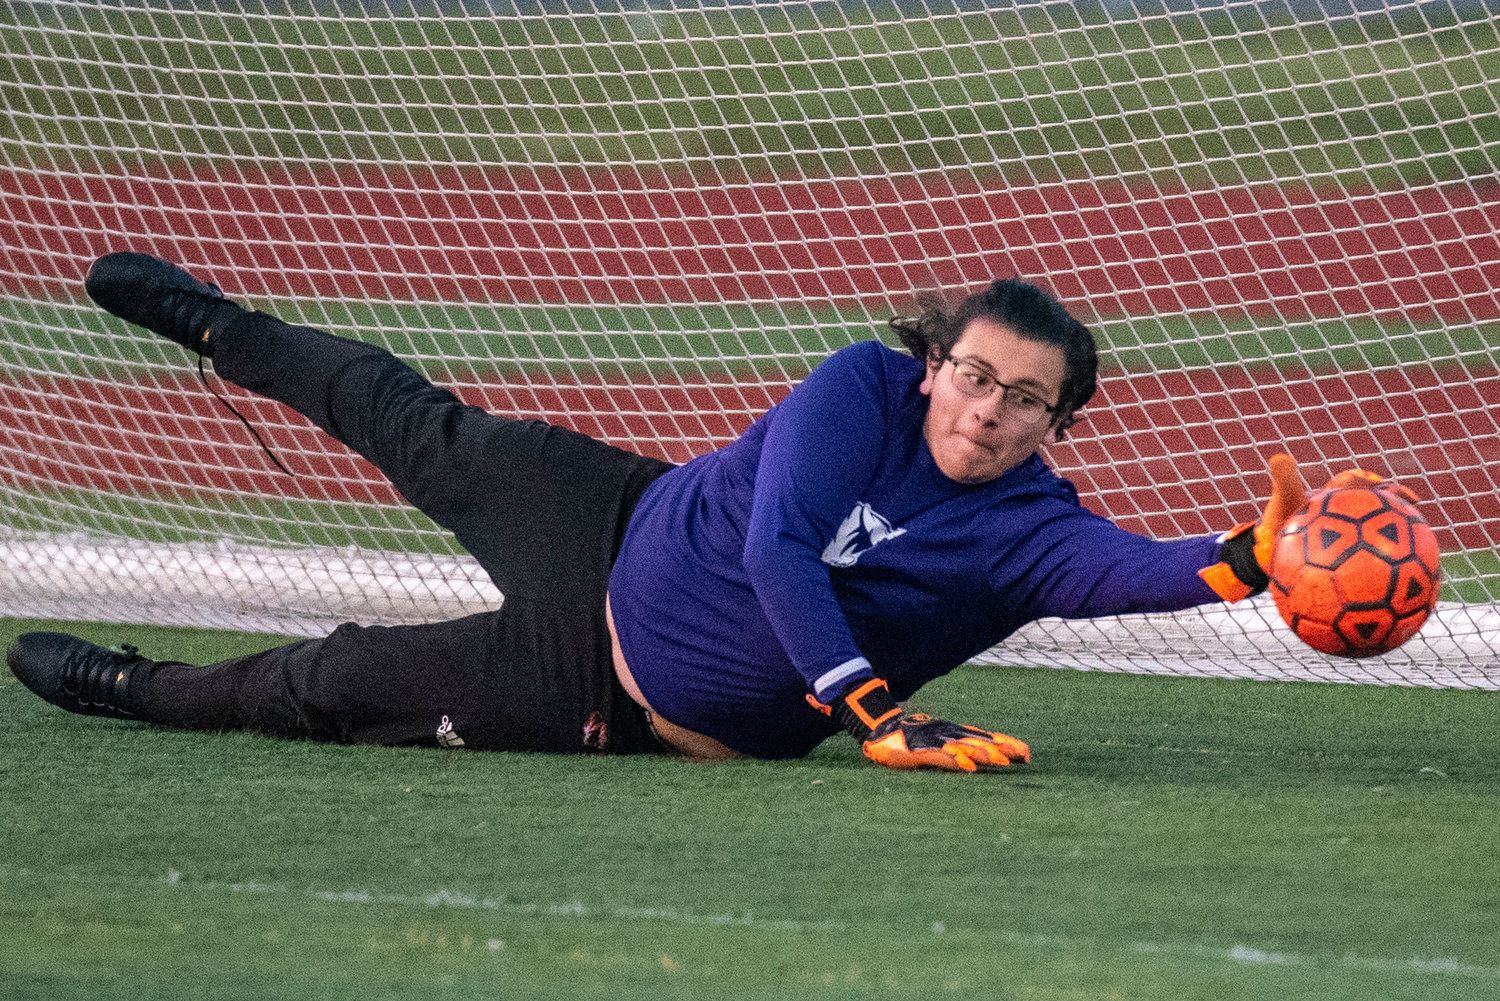 Centralia keeper Victory Reyes dives to make a save in regulation against W.F. West on April 22.